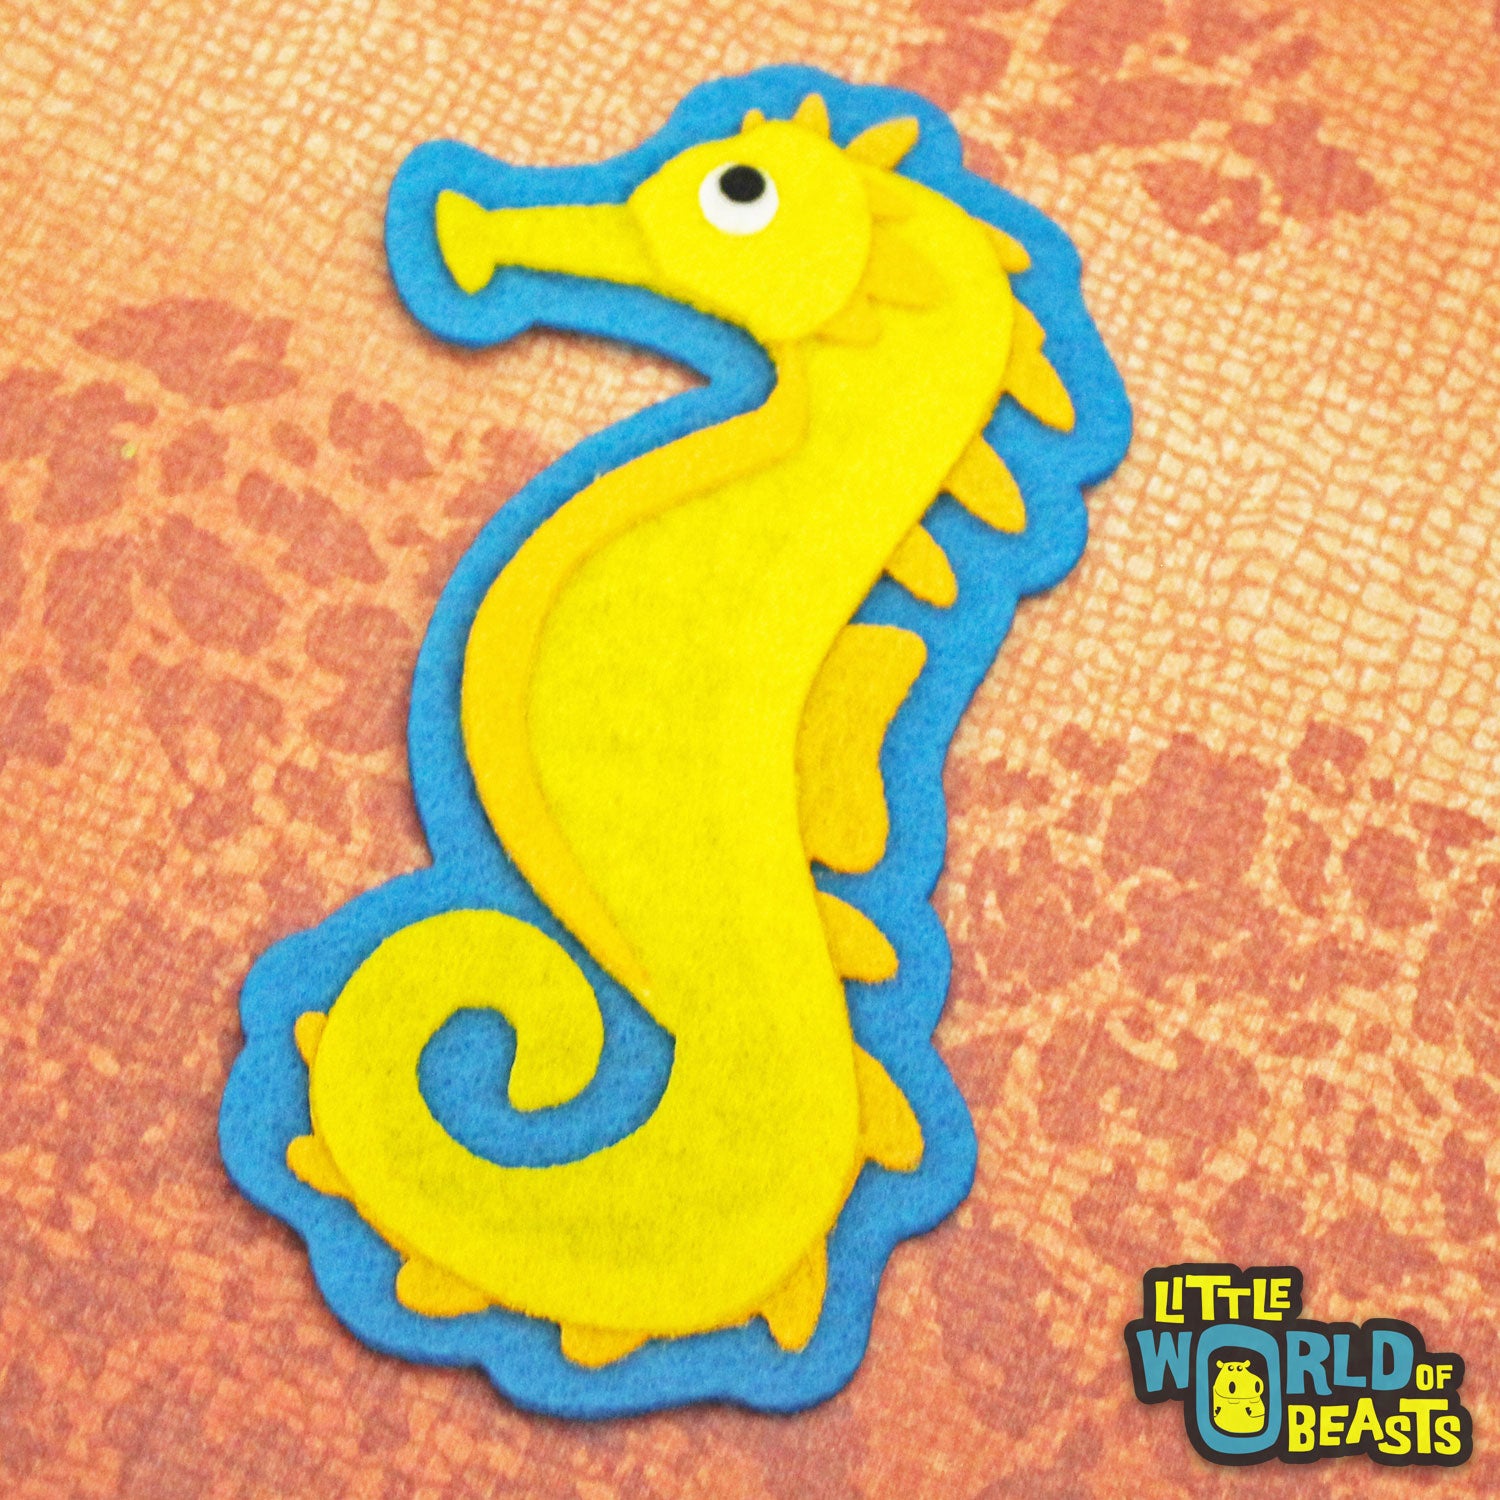 Archibald the Sea Horse Patch - Iron On or Sew On - Little World of Beasts